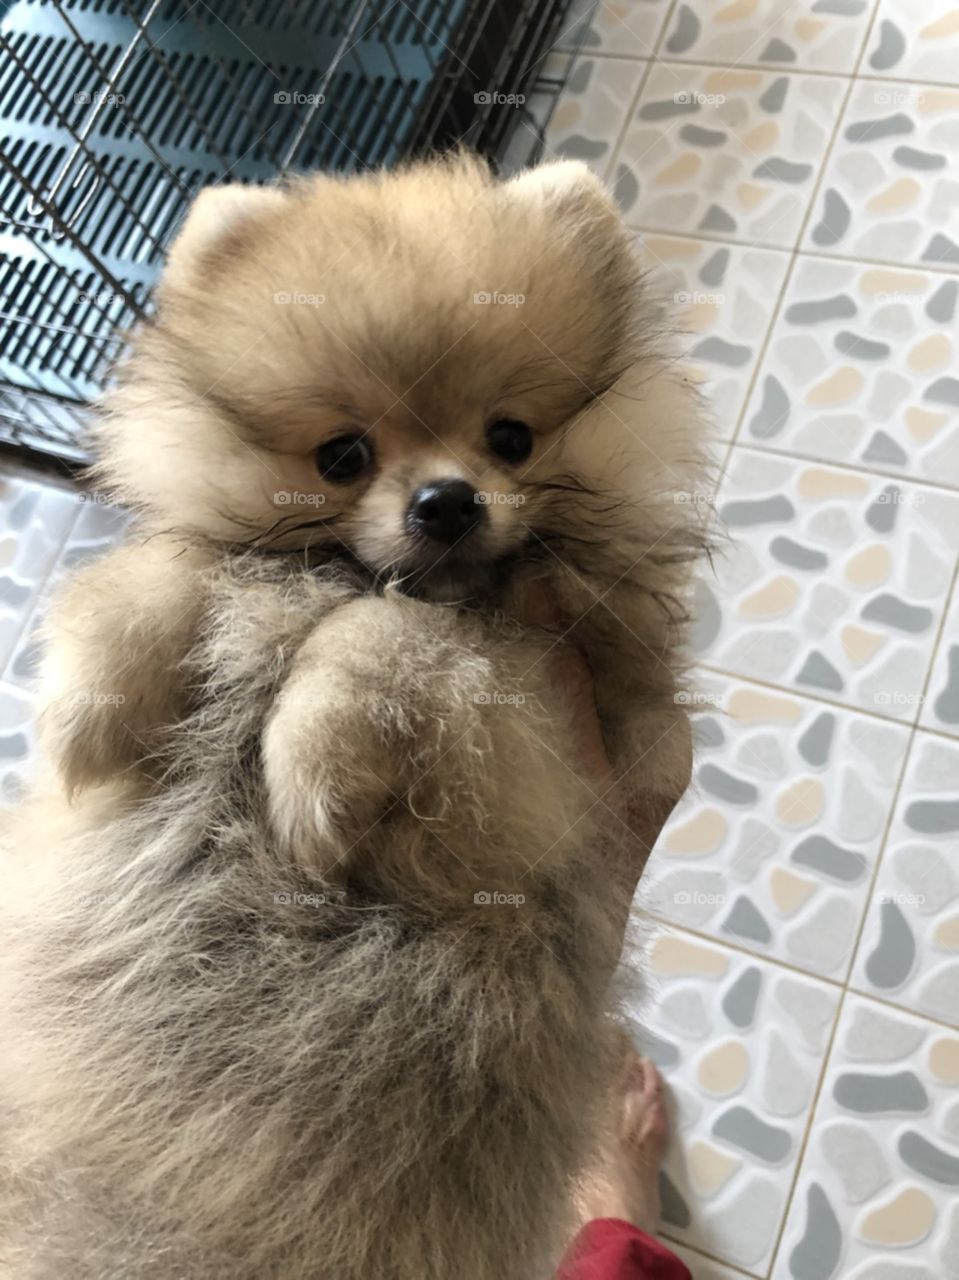 puppy "pomeranian" has furry and fluffy hair.